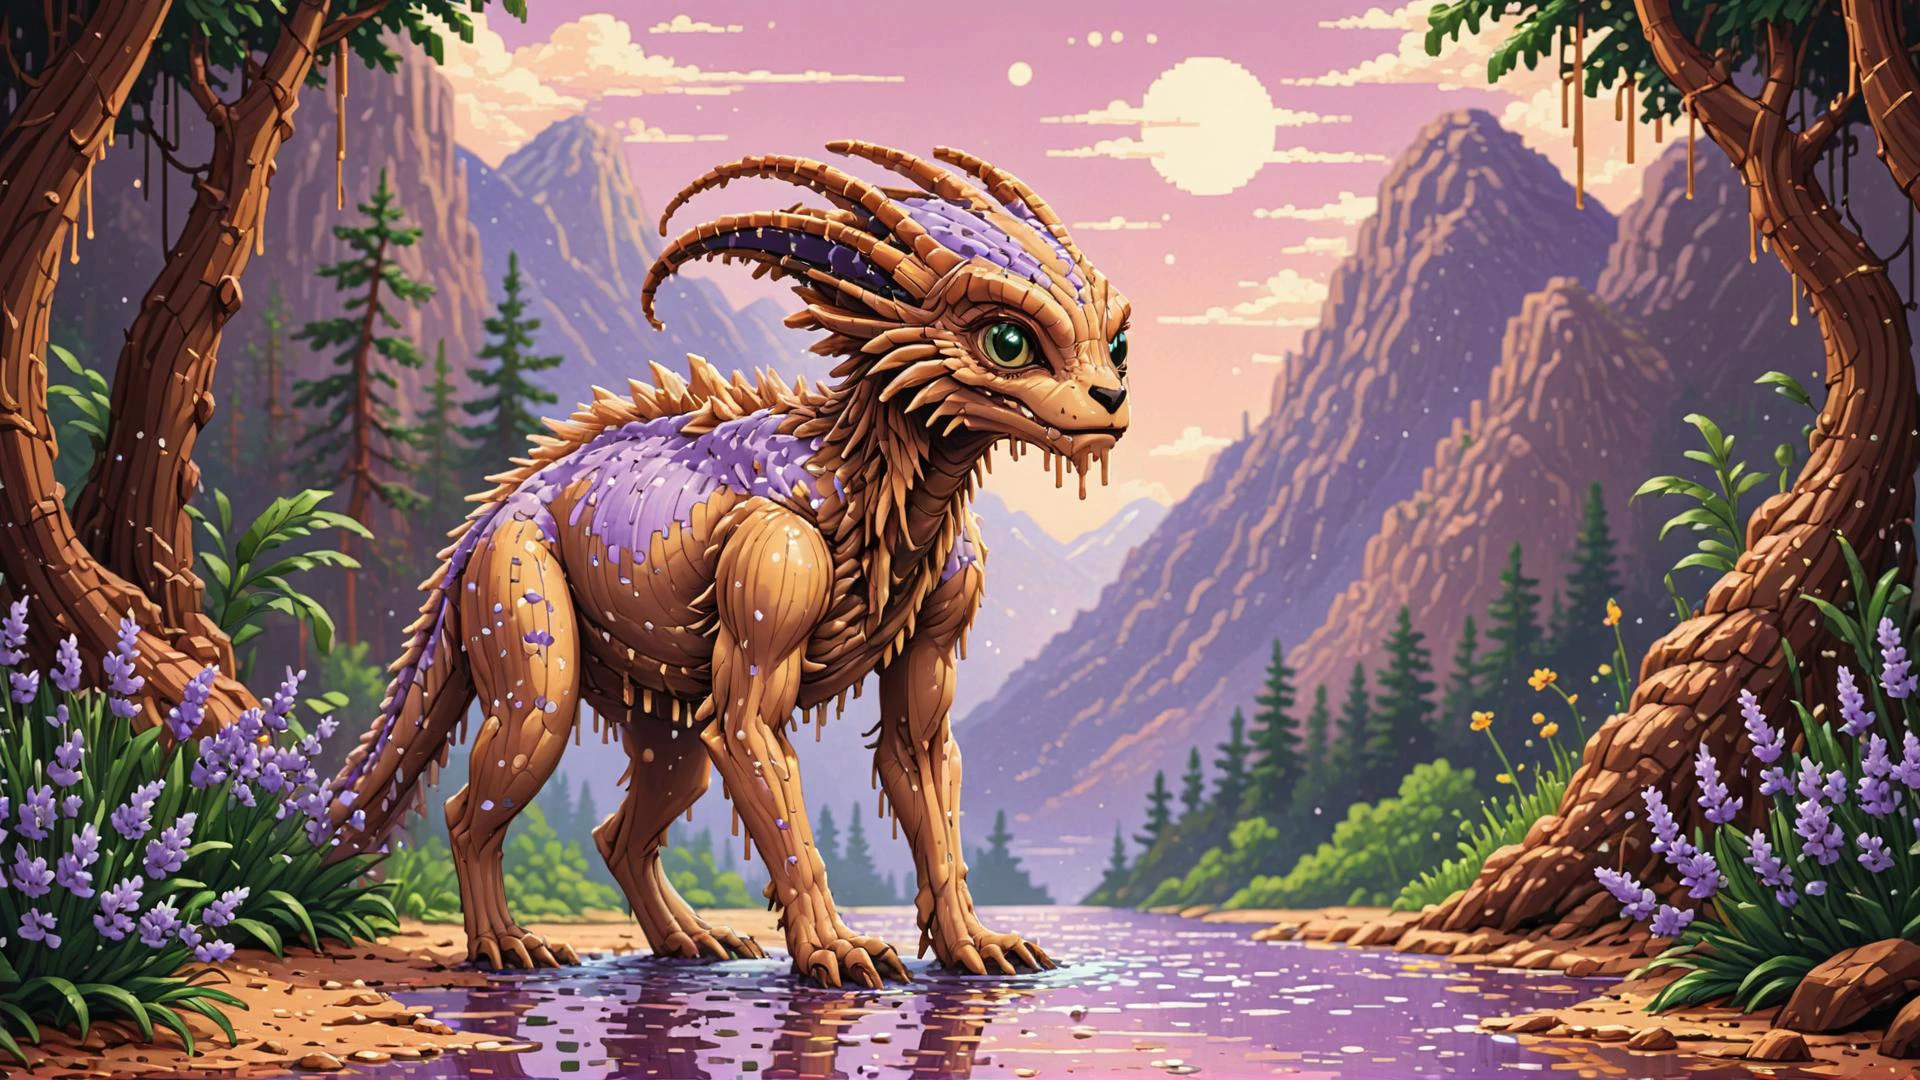 otherworldly, Warm Colors, alien and Taiga, dripping Lavender and Brown, pixel art zlj-xl